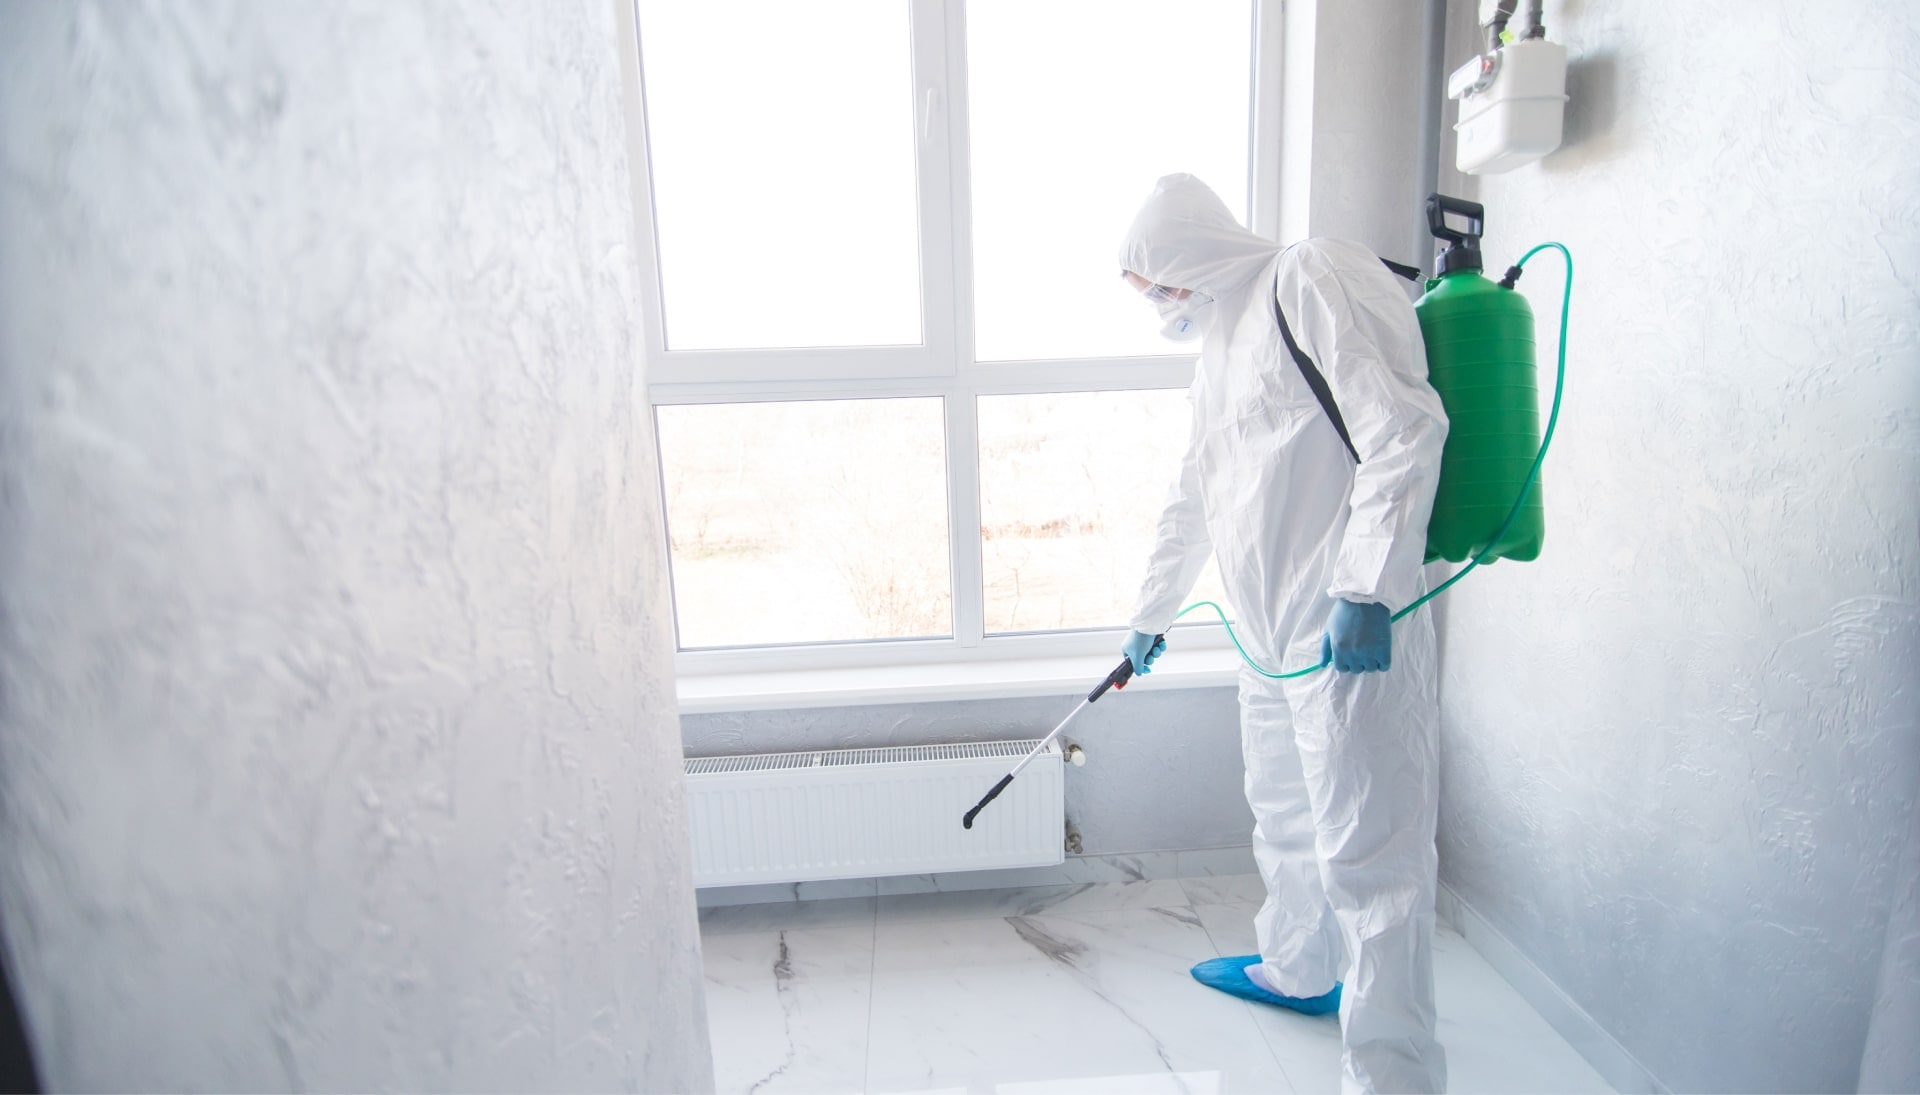 We provide the highest-quality mold inspection, testing, and removal services in the Bowie, Maryland area.